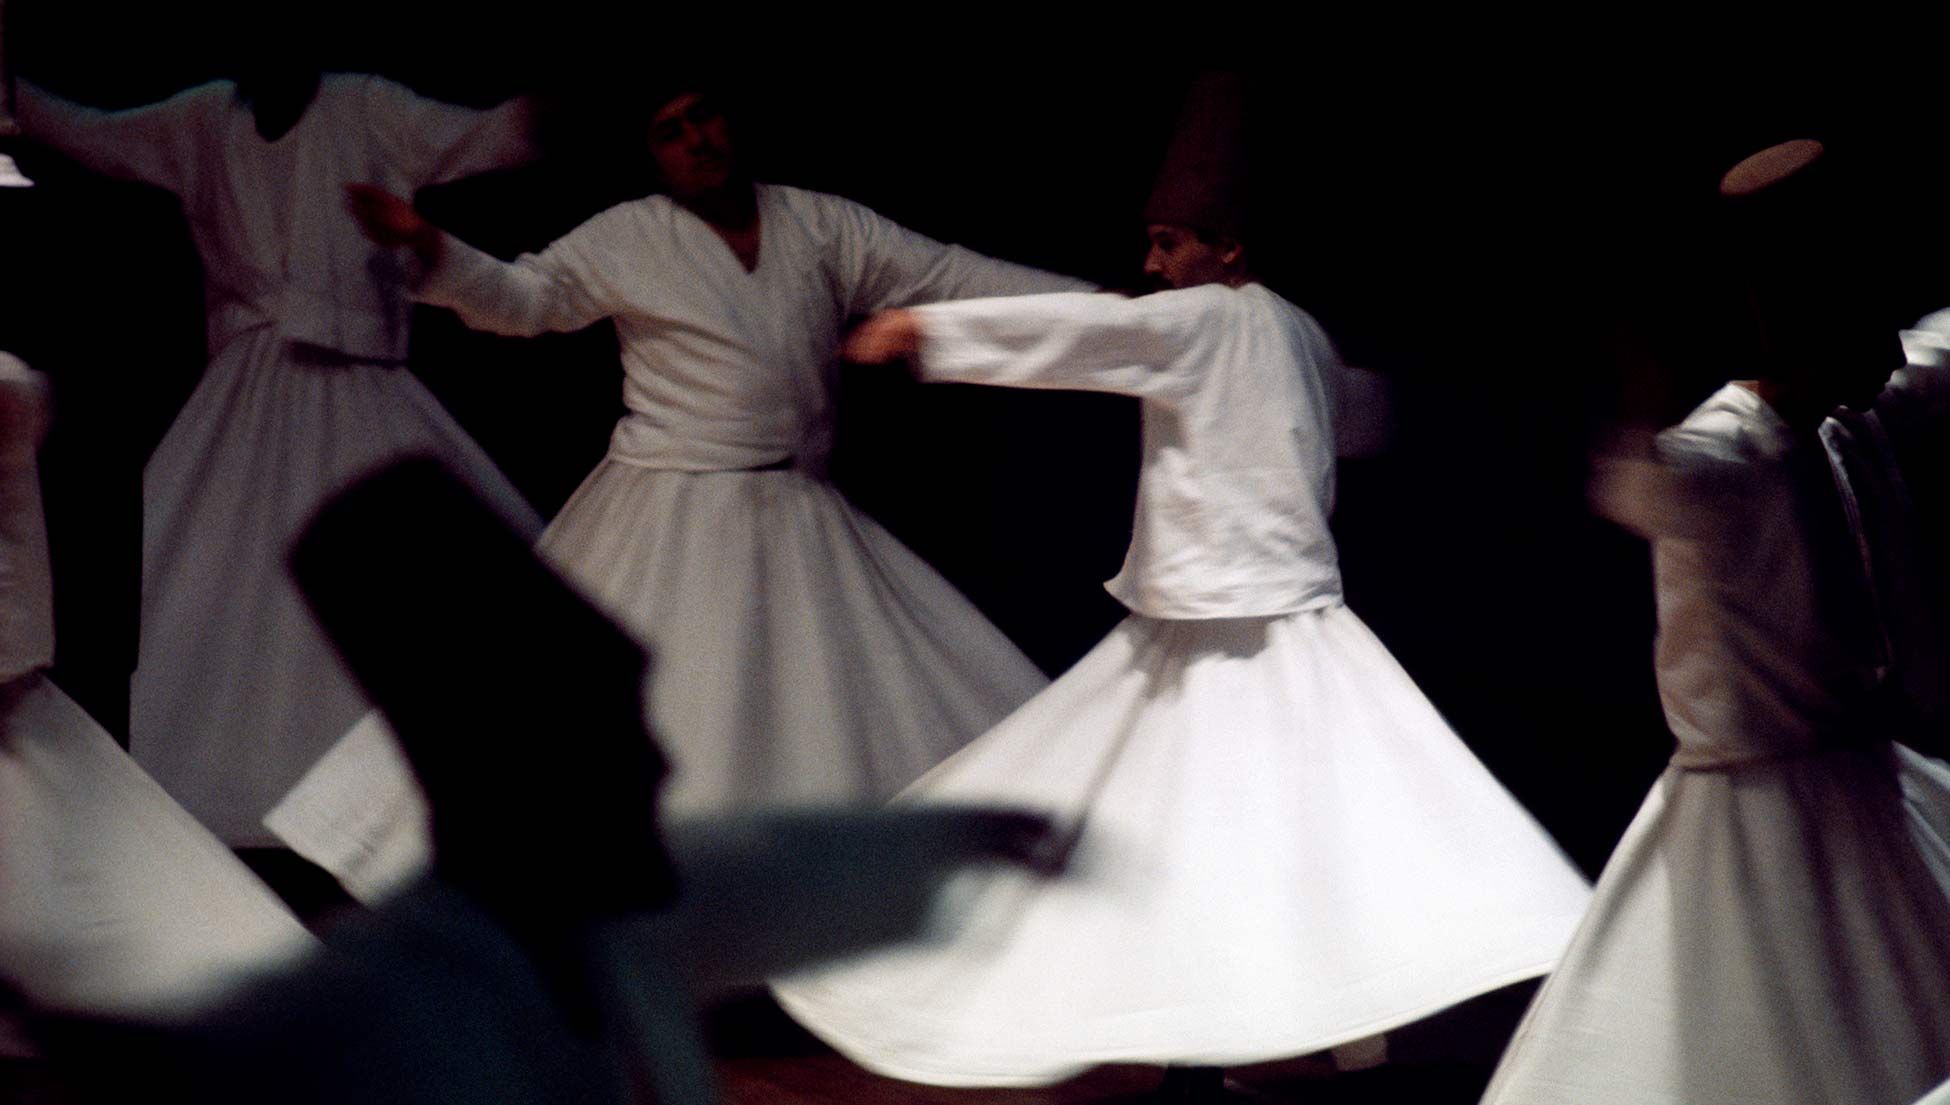 Sufi love poetry is in vogue, but few grasp its radical meaning | Psyche